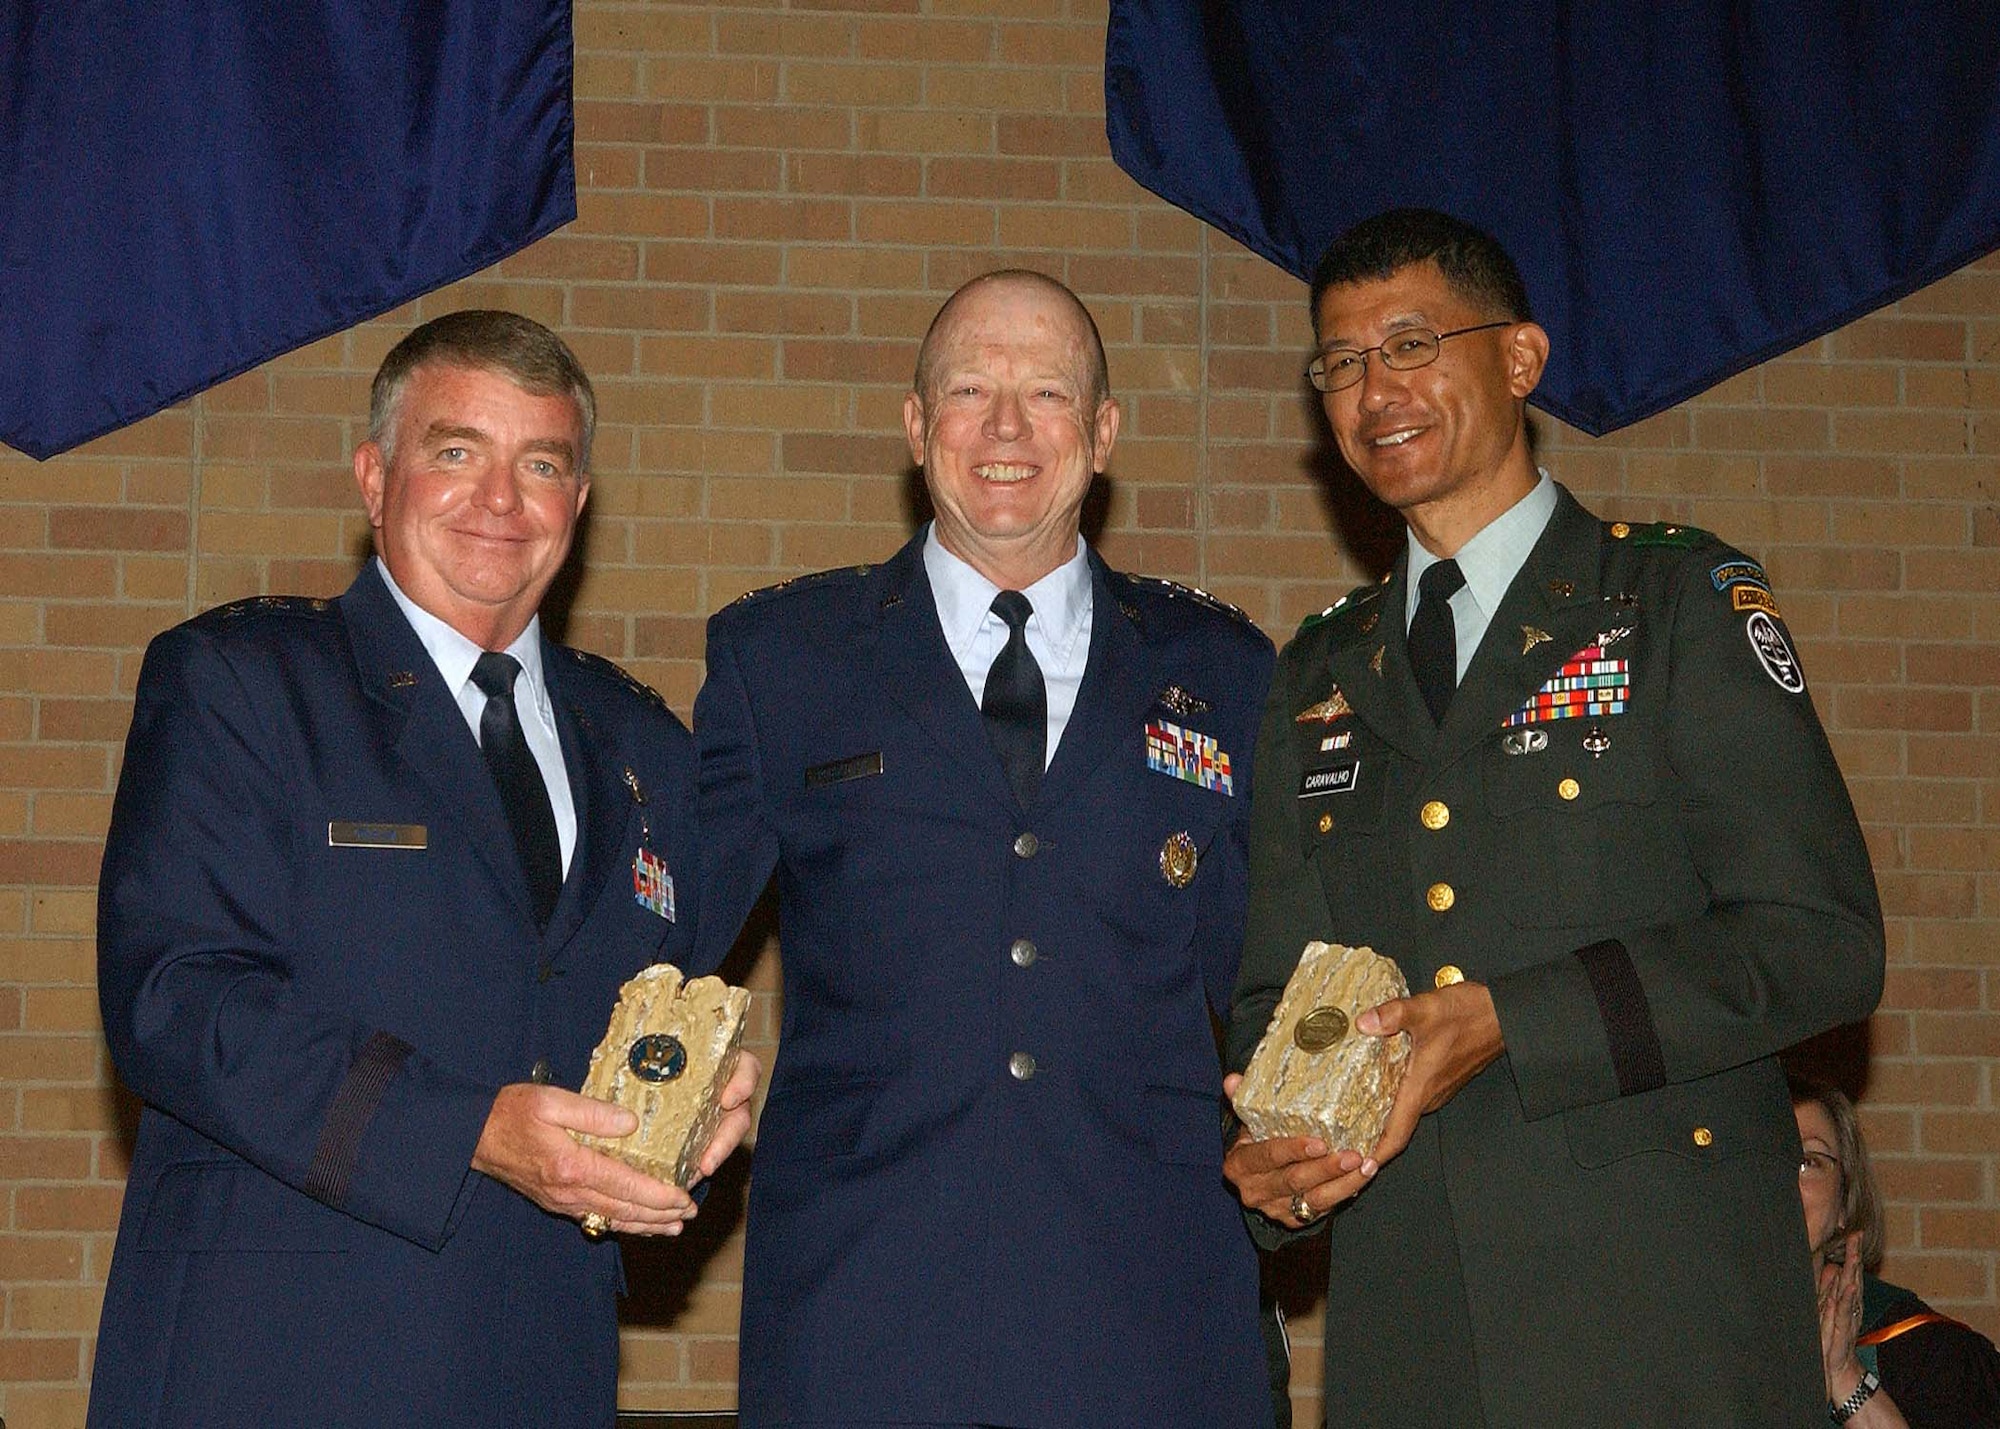 59th Medical Wing Commander Maj. Gen. Tom Travis (left) and Brooke Army Medical Center Commander Brig. Gen. Joseph Caravalho, Jr. (right) present Texas
Snake Stone bookends to Air Force Surgeon General Lt. Gen. James Roudebush during the San Antonio Uniformed Services Health Education Consortium awards and graduation ceremony June 5 in the University of Texas Health Science Center at San Antonio auditorium.  During the graduation portion of the ceremony, 243 graduates from 36 graduate medical education programs and 50 graduates from 13 allied health care programs received diplomas. (U.S. Air Force photo/Alan Boedeker)
                           